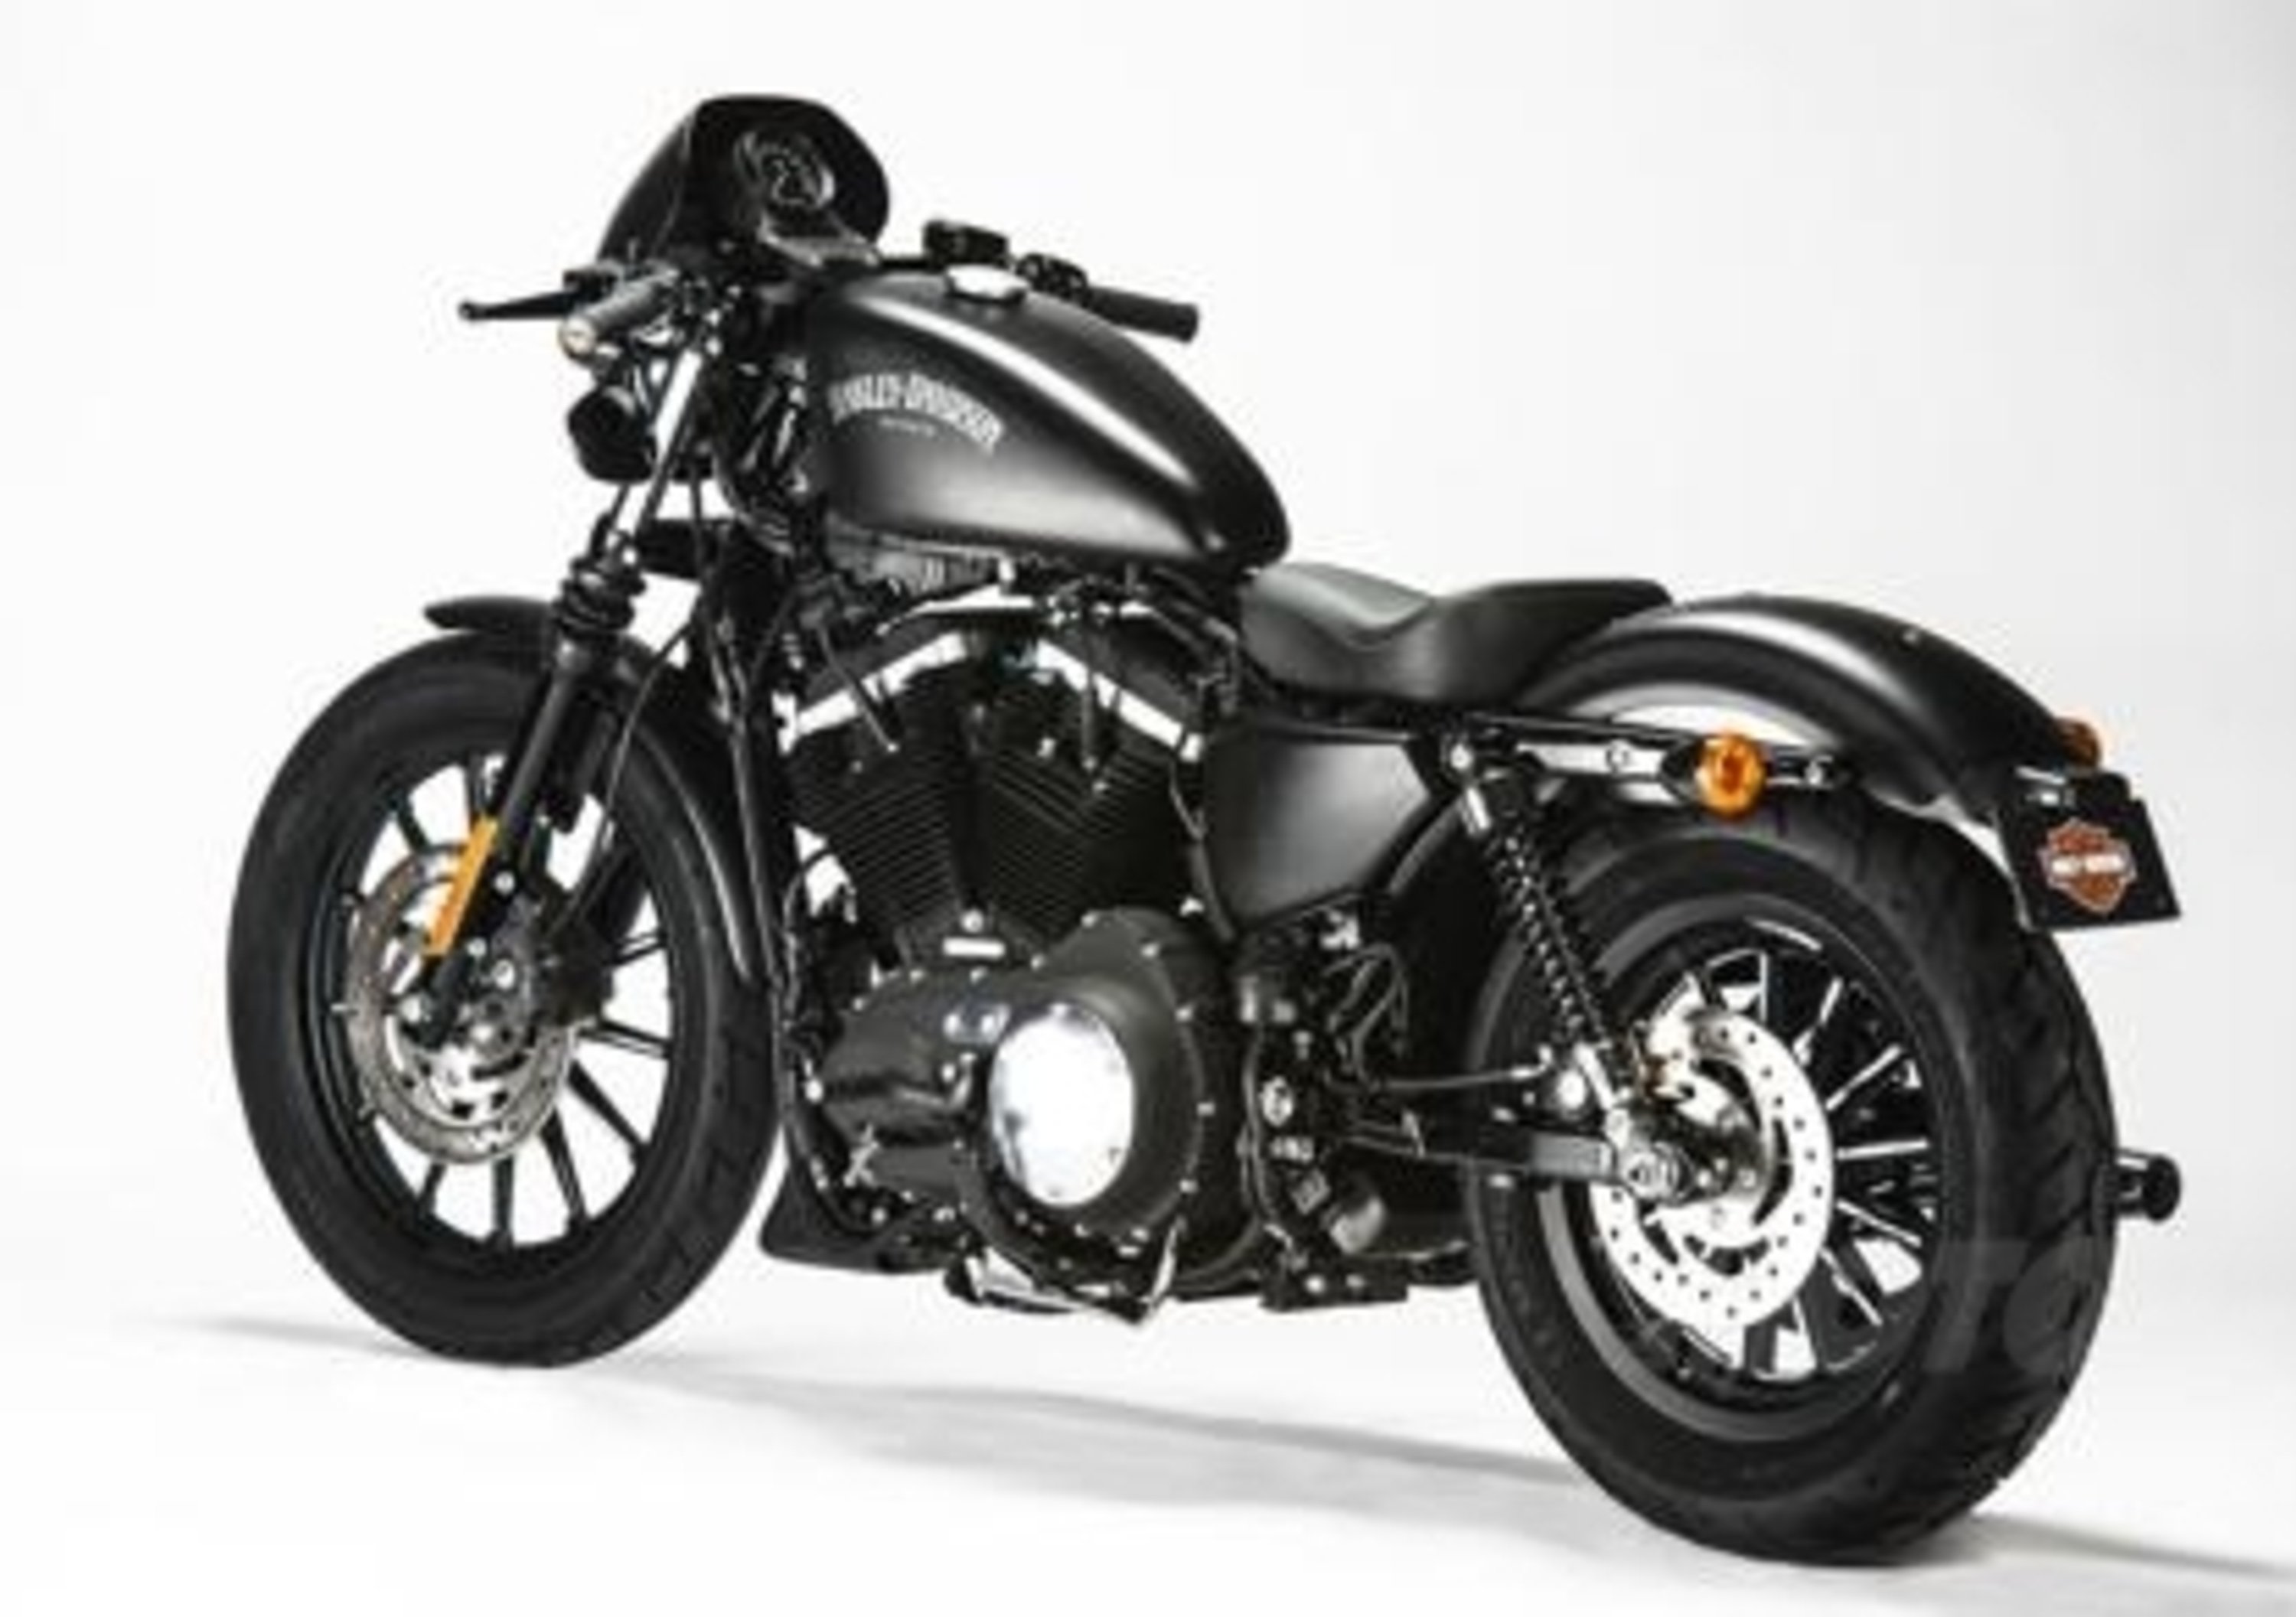 Harley-Davidson Iron 883 Special Edition S, the Black Beauty